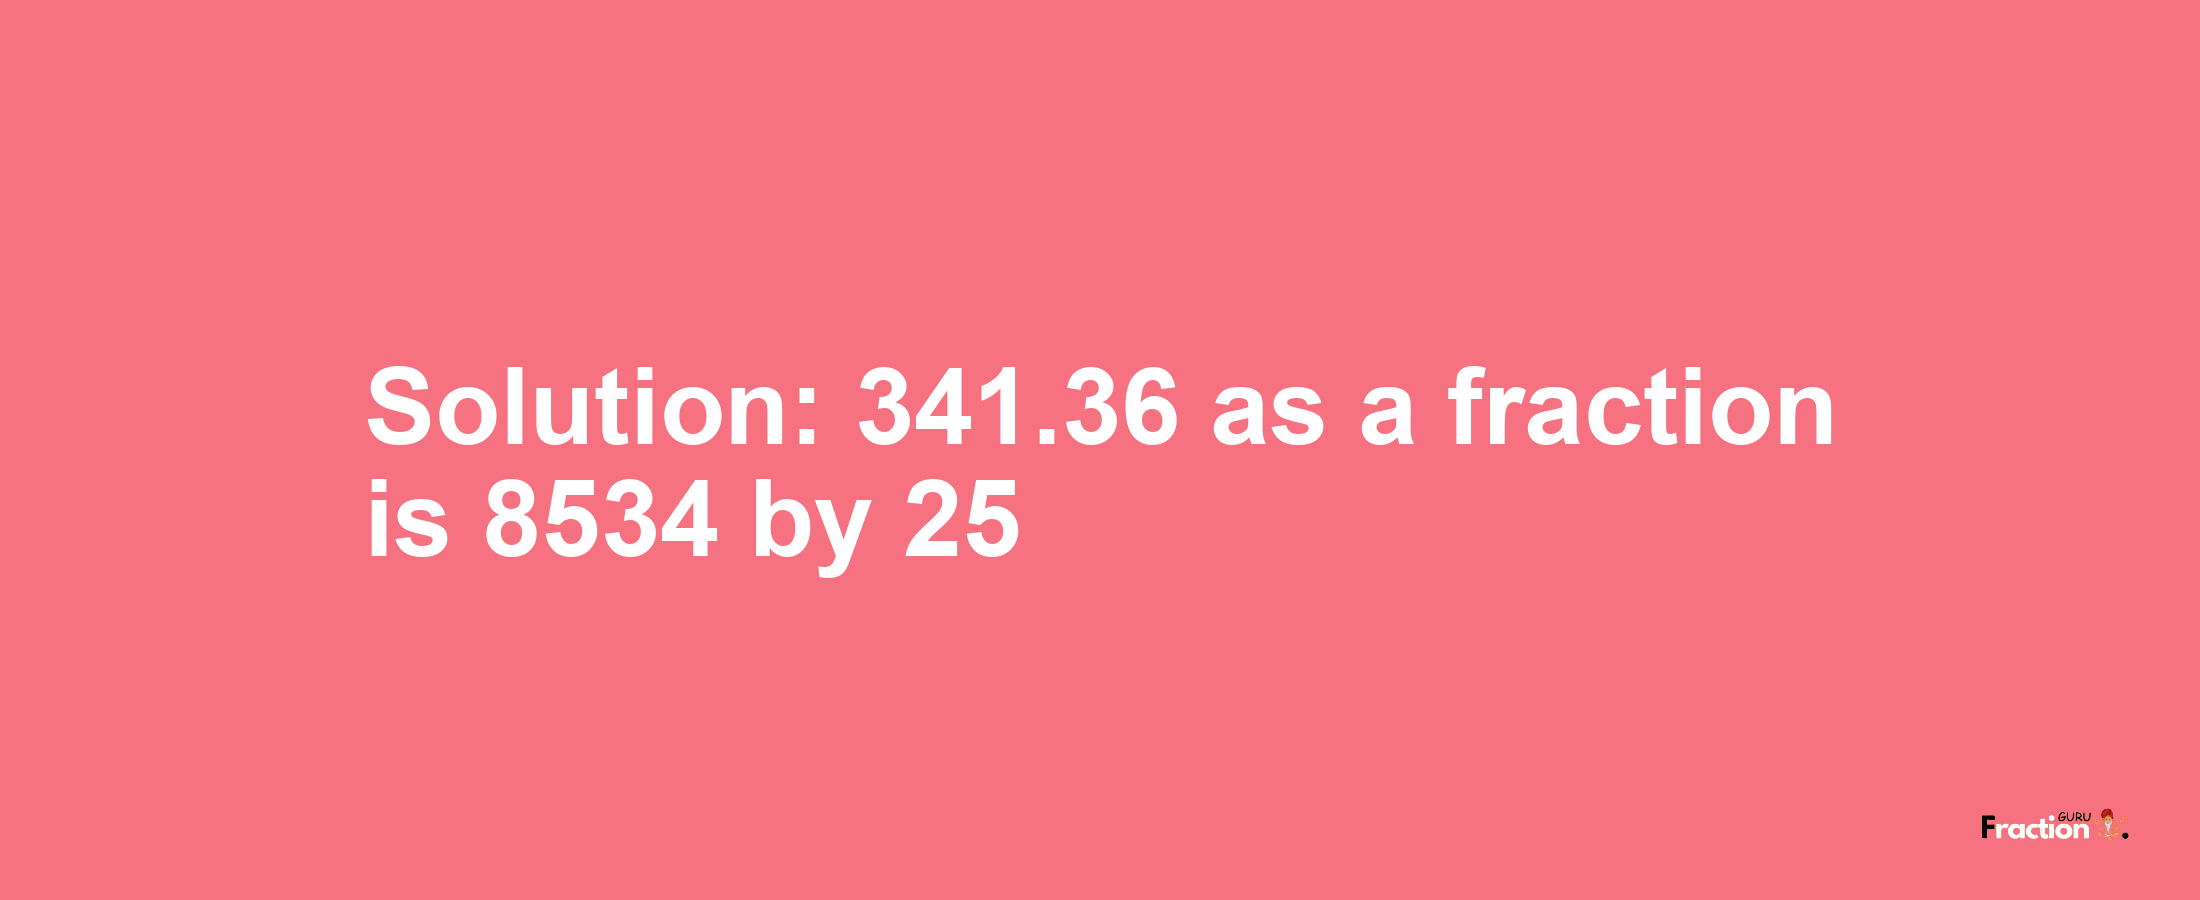 Solution:341.36 as a fraction is 8534/25